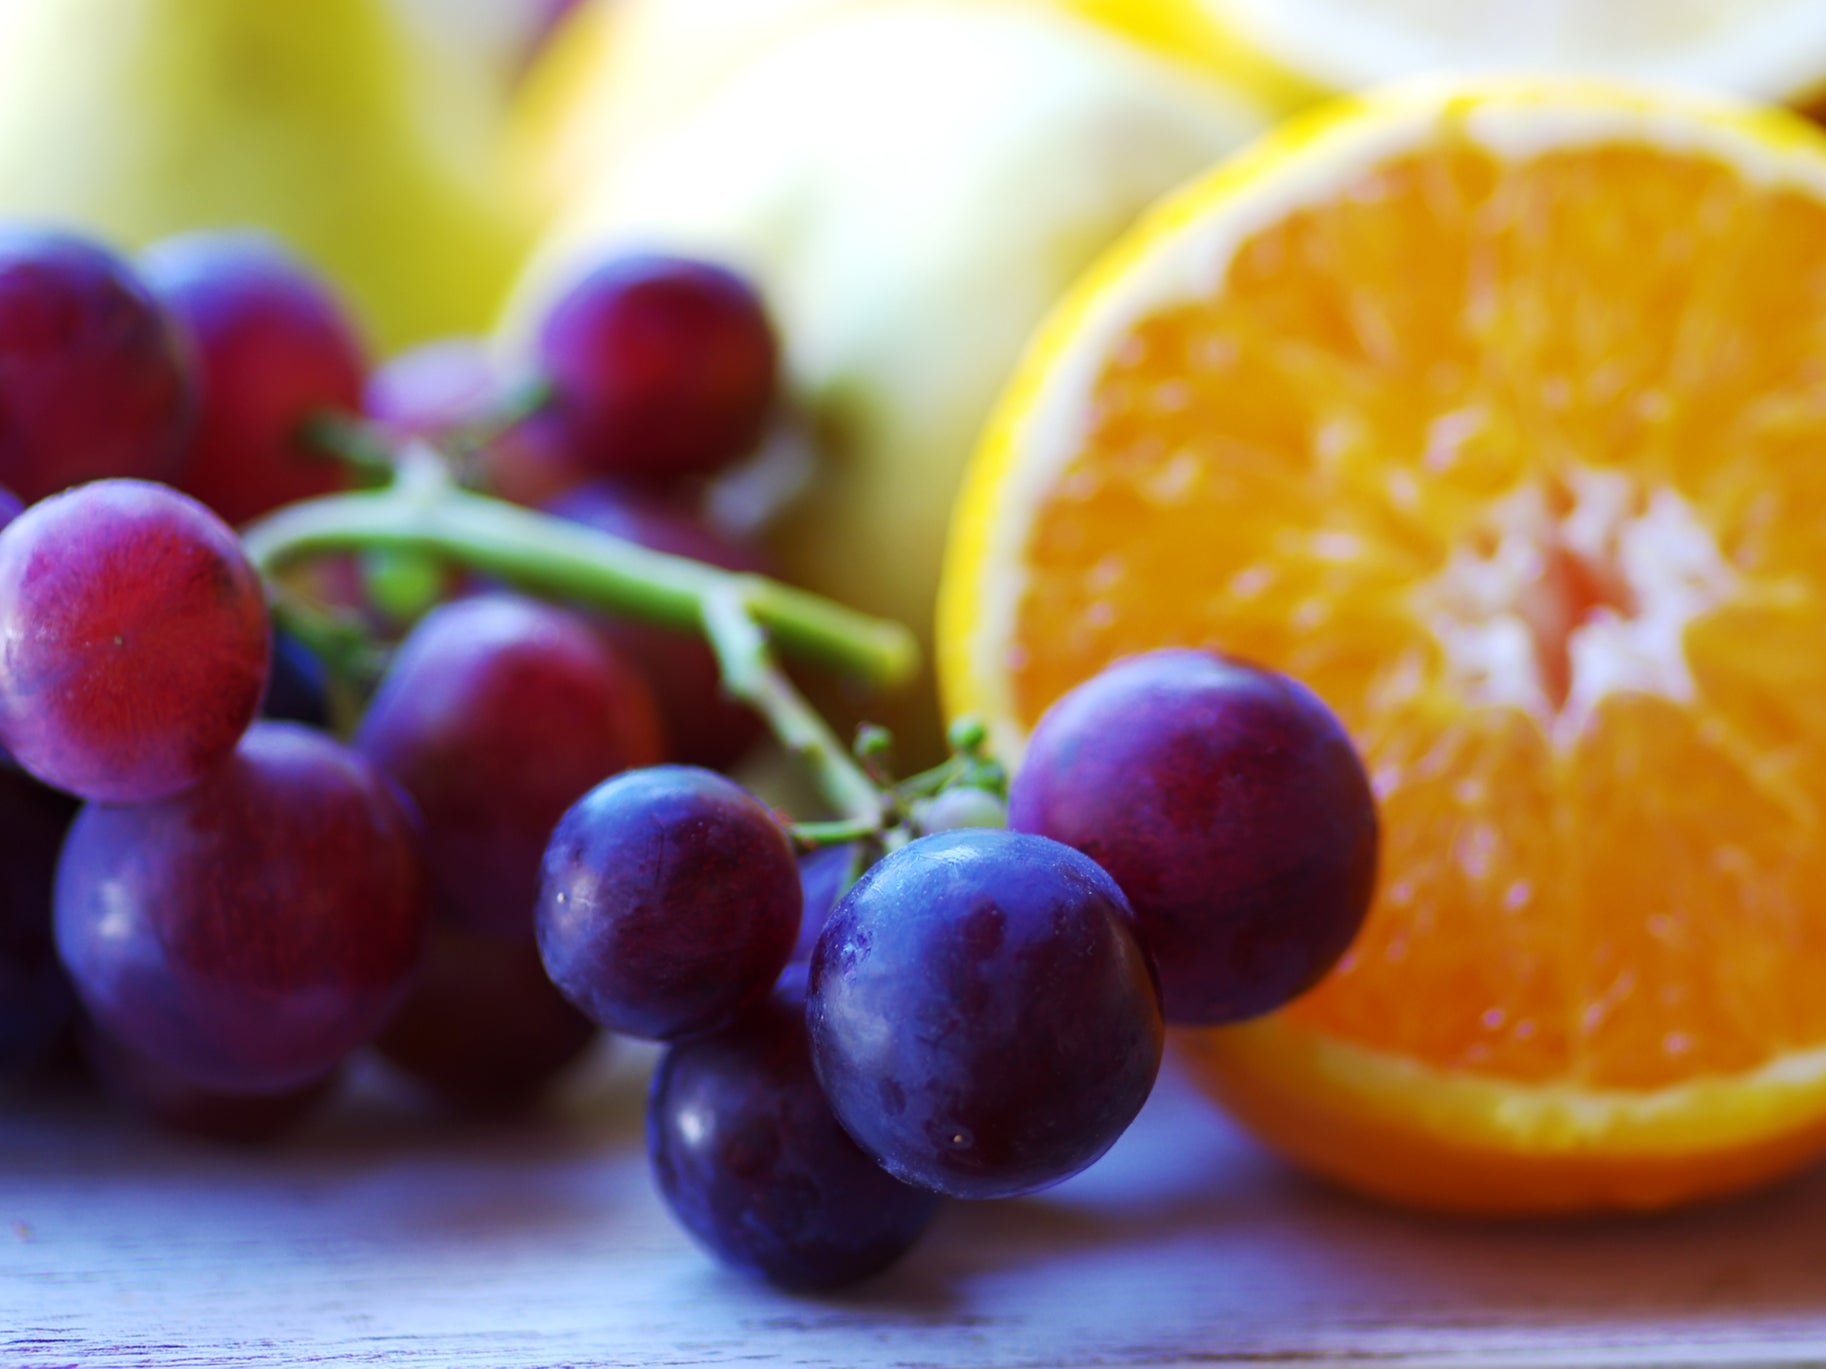 Oranges and grapes contain ‘cocktail’ of pesticides